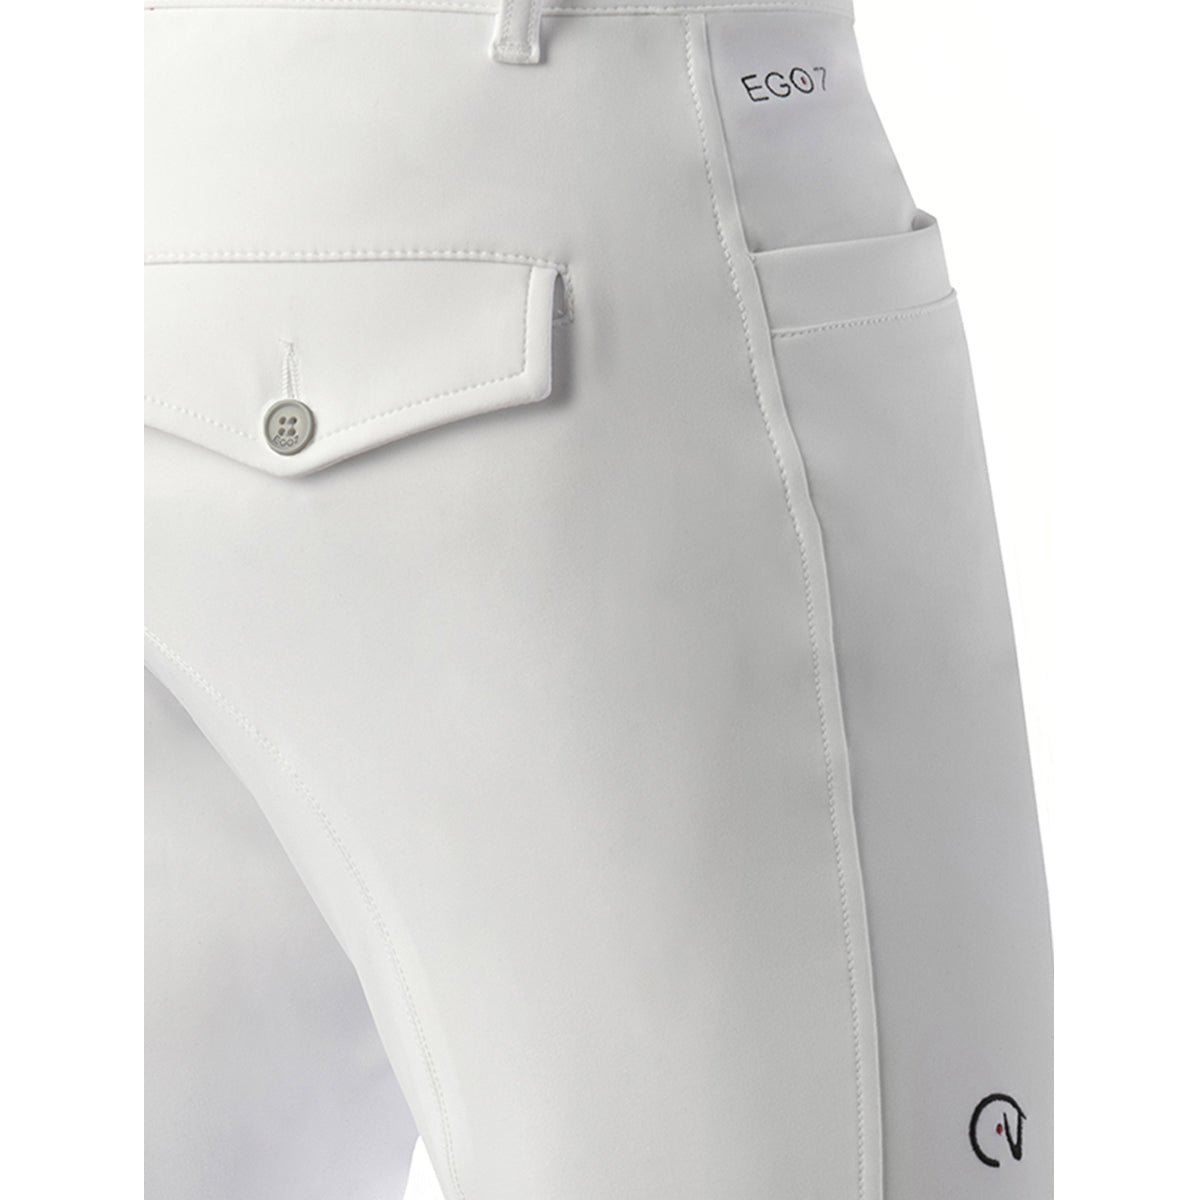 EGO 7 Men's Jumping EJ Knee Patch Breeches